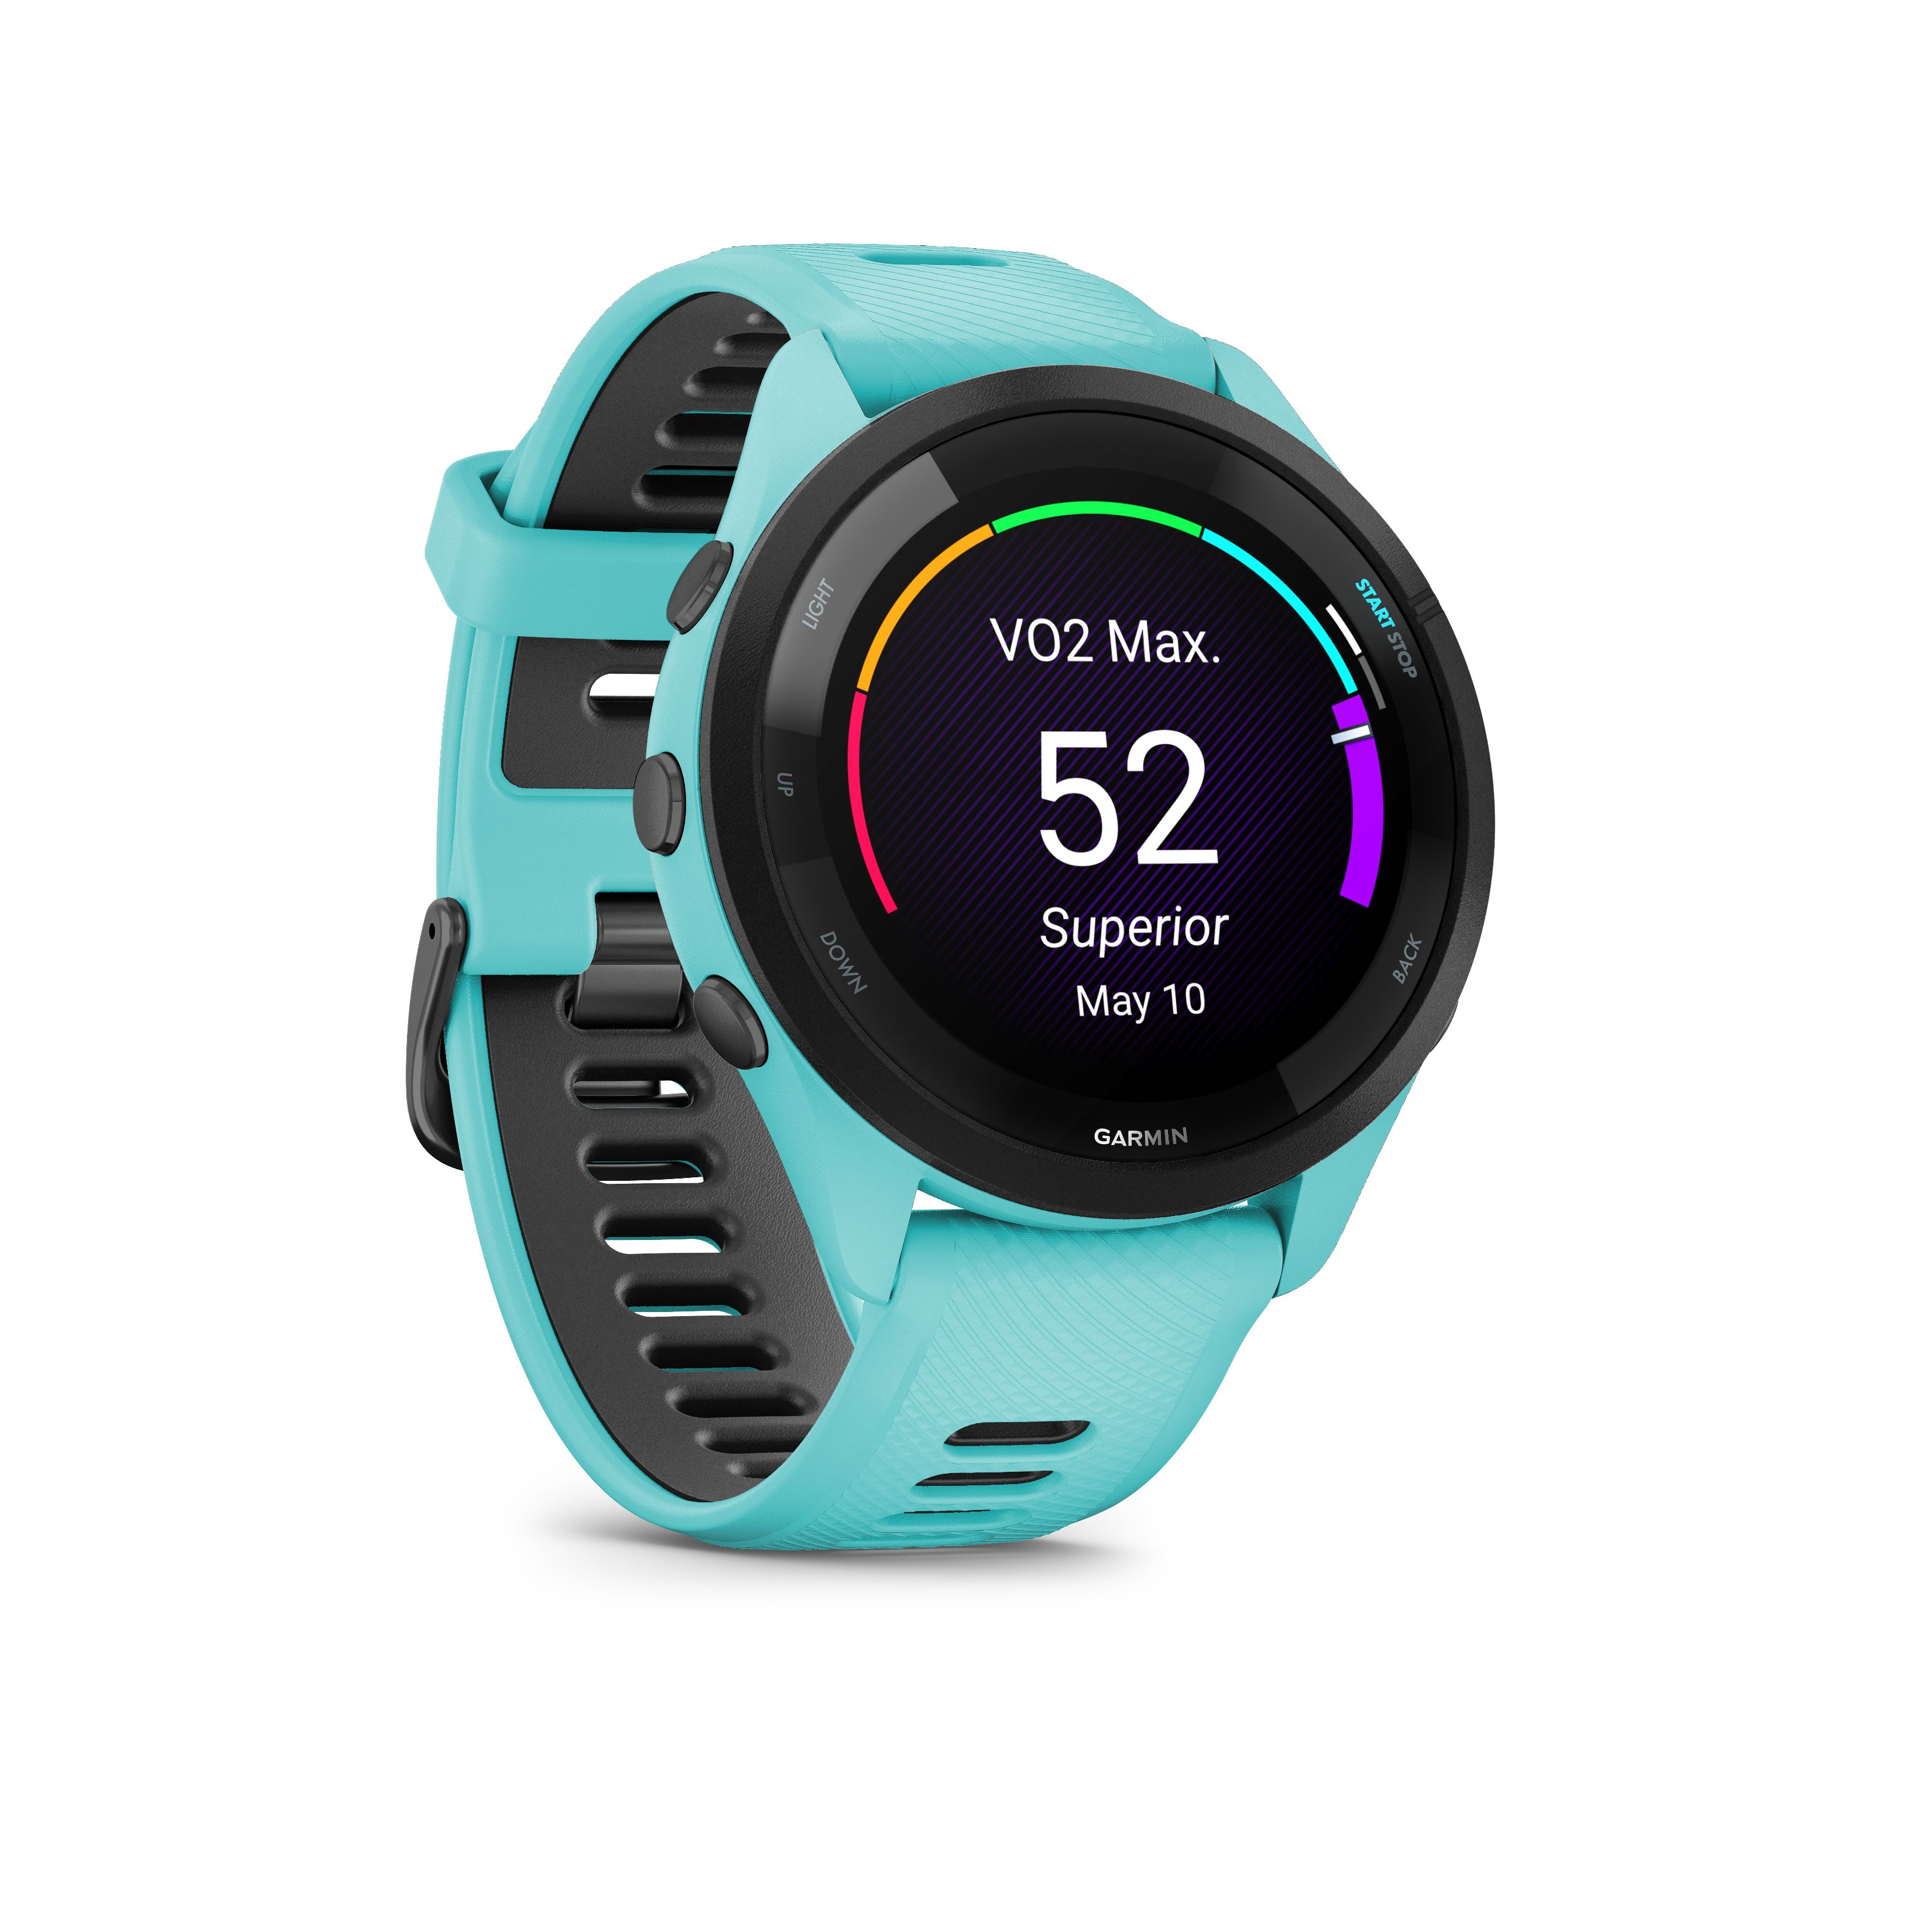 Forerunner 965 Watch Owner's Manual - Viewing Your Real-Time Stamina